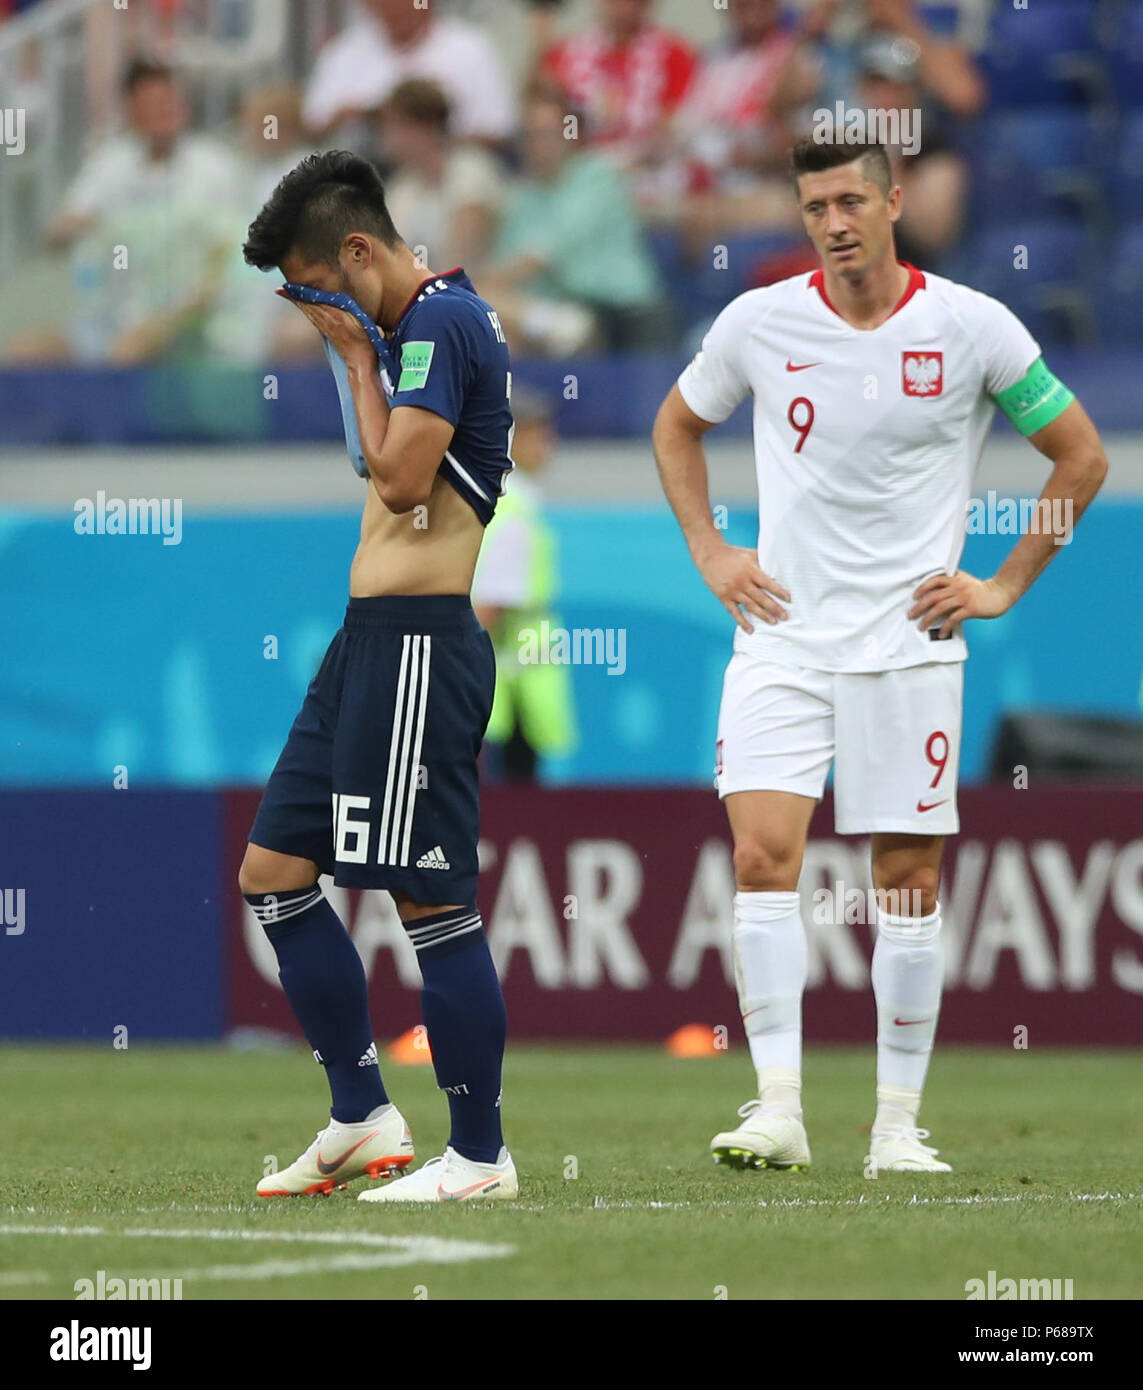 Volgograd, Russia. 28th June, 2018. Hotaru Yamaguchi (L) of Japan and Robert Lewandowski of Poland react after the 2018 FIFA World Cup Group H match between Japan and Poland in Volgograd, Russia, June 28, 2018. Poland won 1-0. Japan advanced to the round of 16. Credit: Wu Zhuang/Xinhua/Alamy Live News Stock Photo